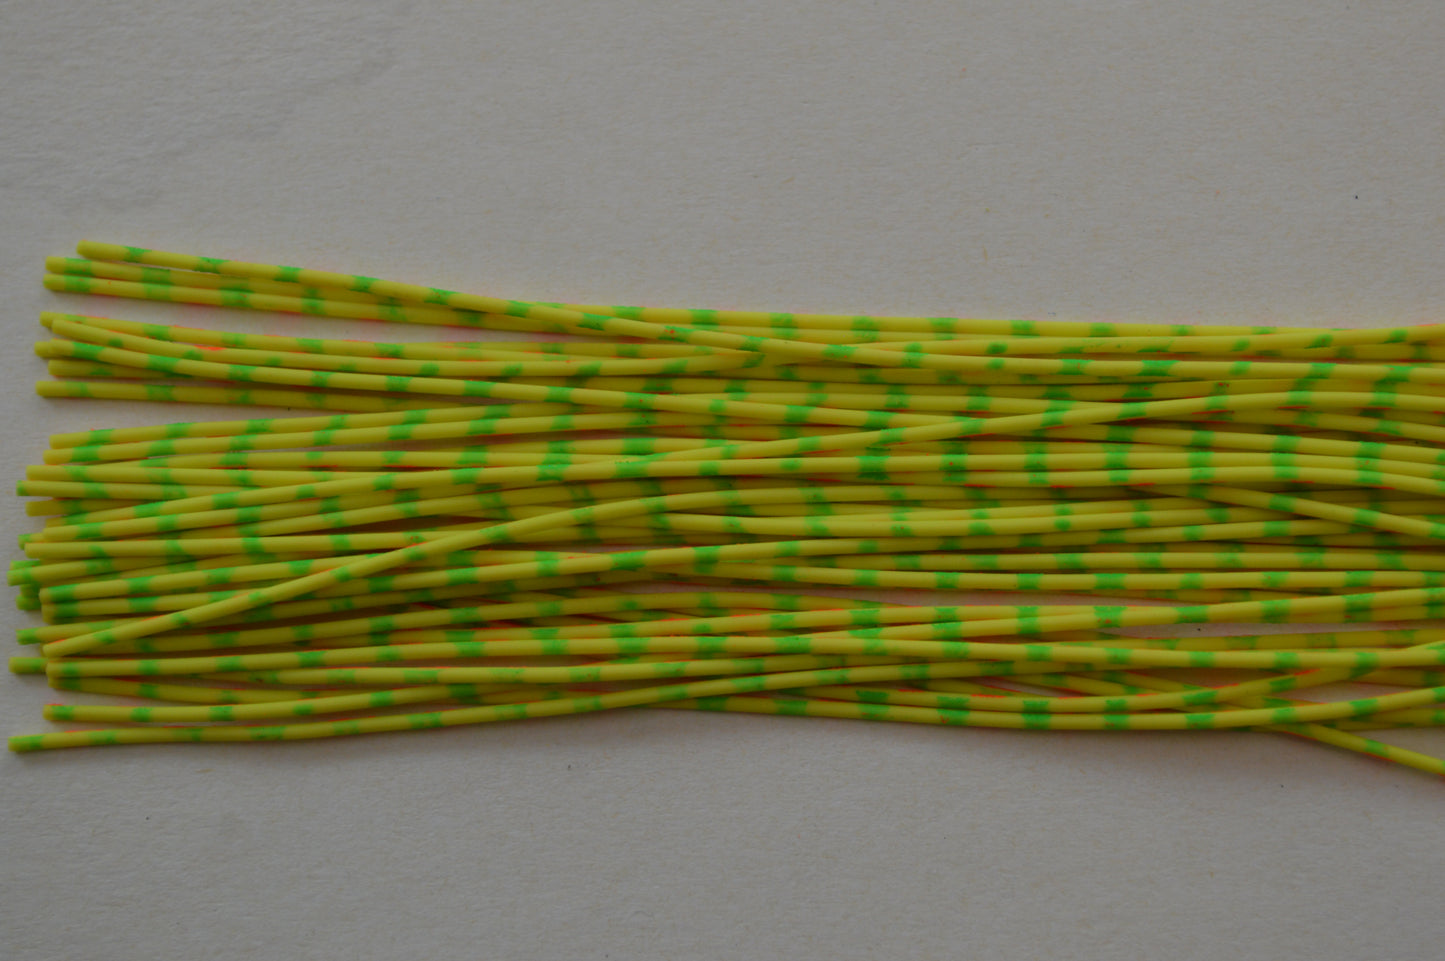 Medium Reptile Rubber Chartreuse with Orange on 1 side and Lime on 1 side-C-02-04